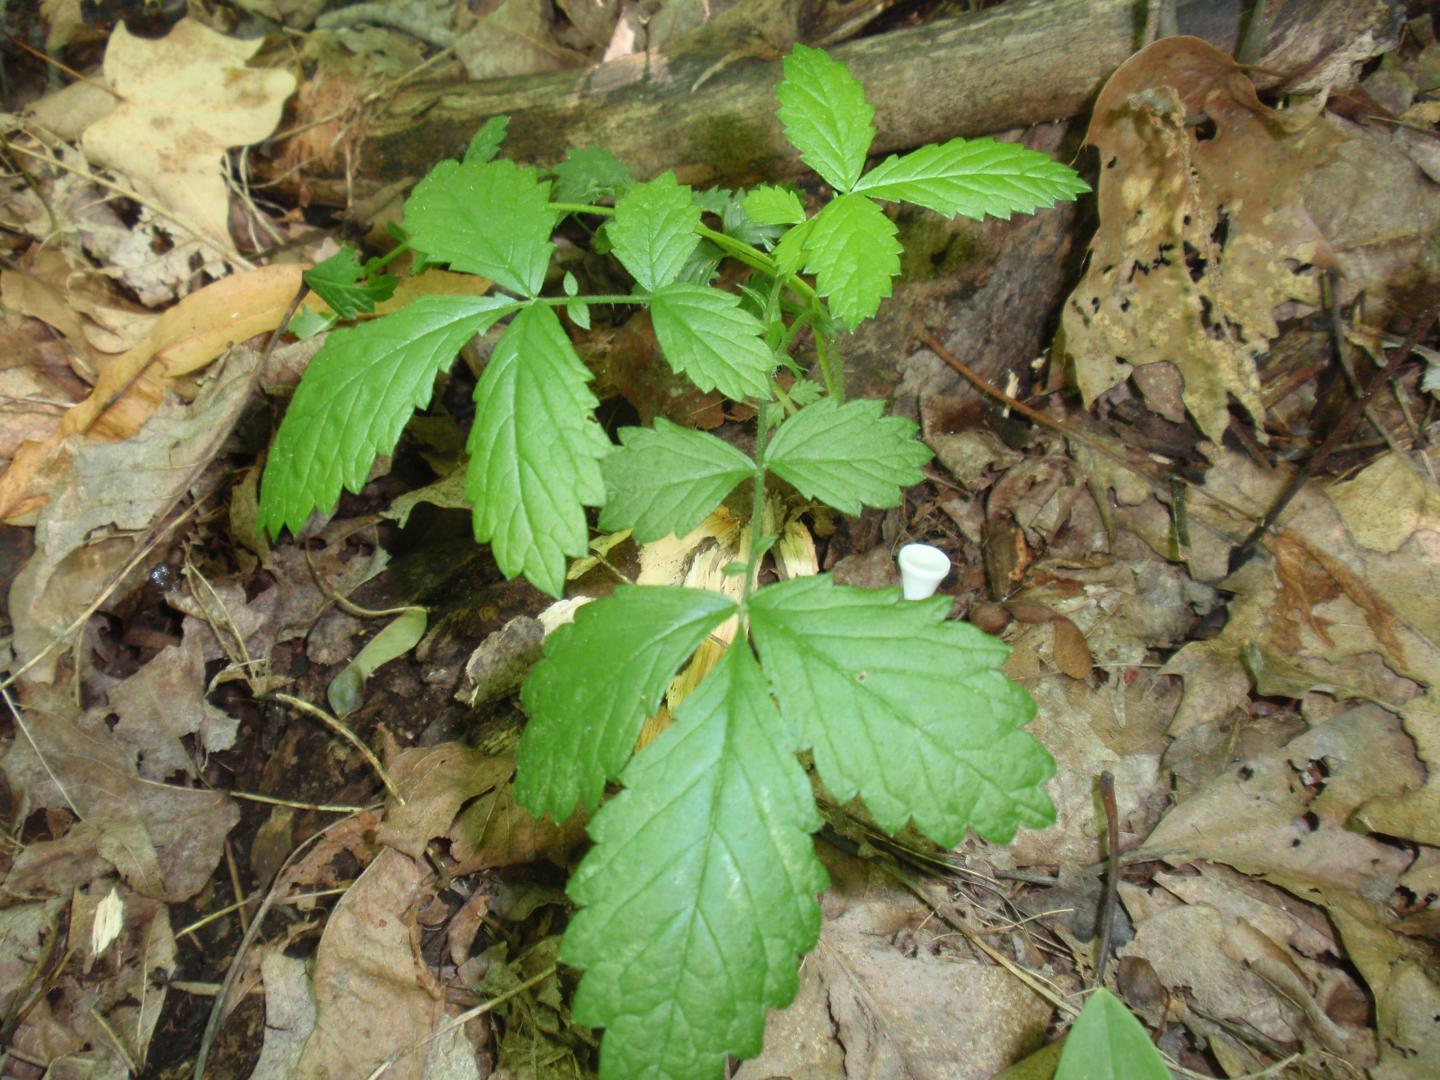 Woodland Agrimony at a Field Site in Upstate New York